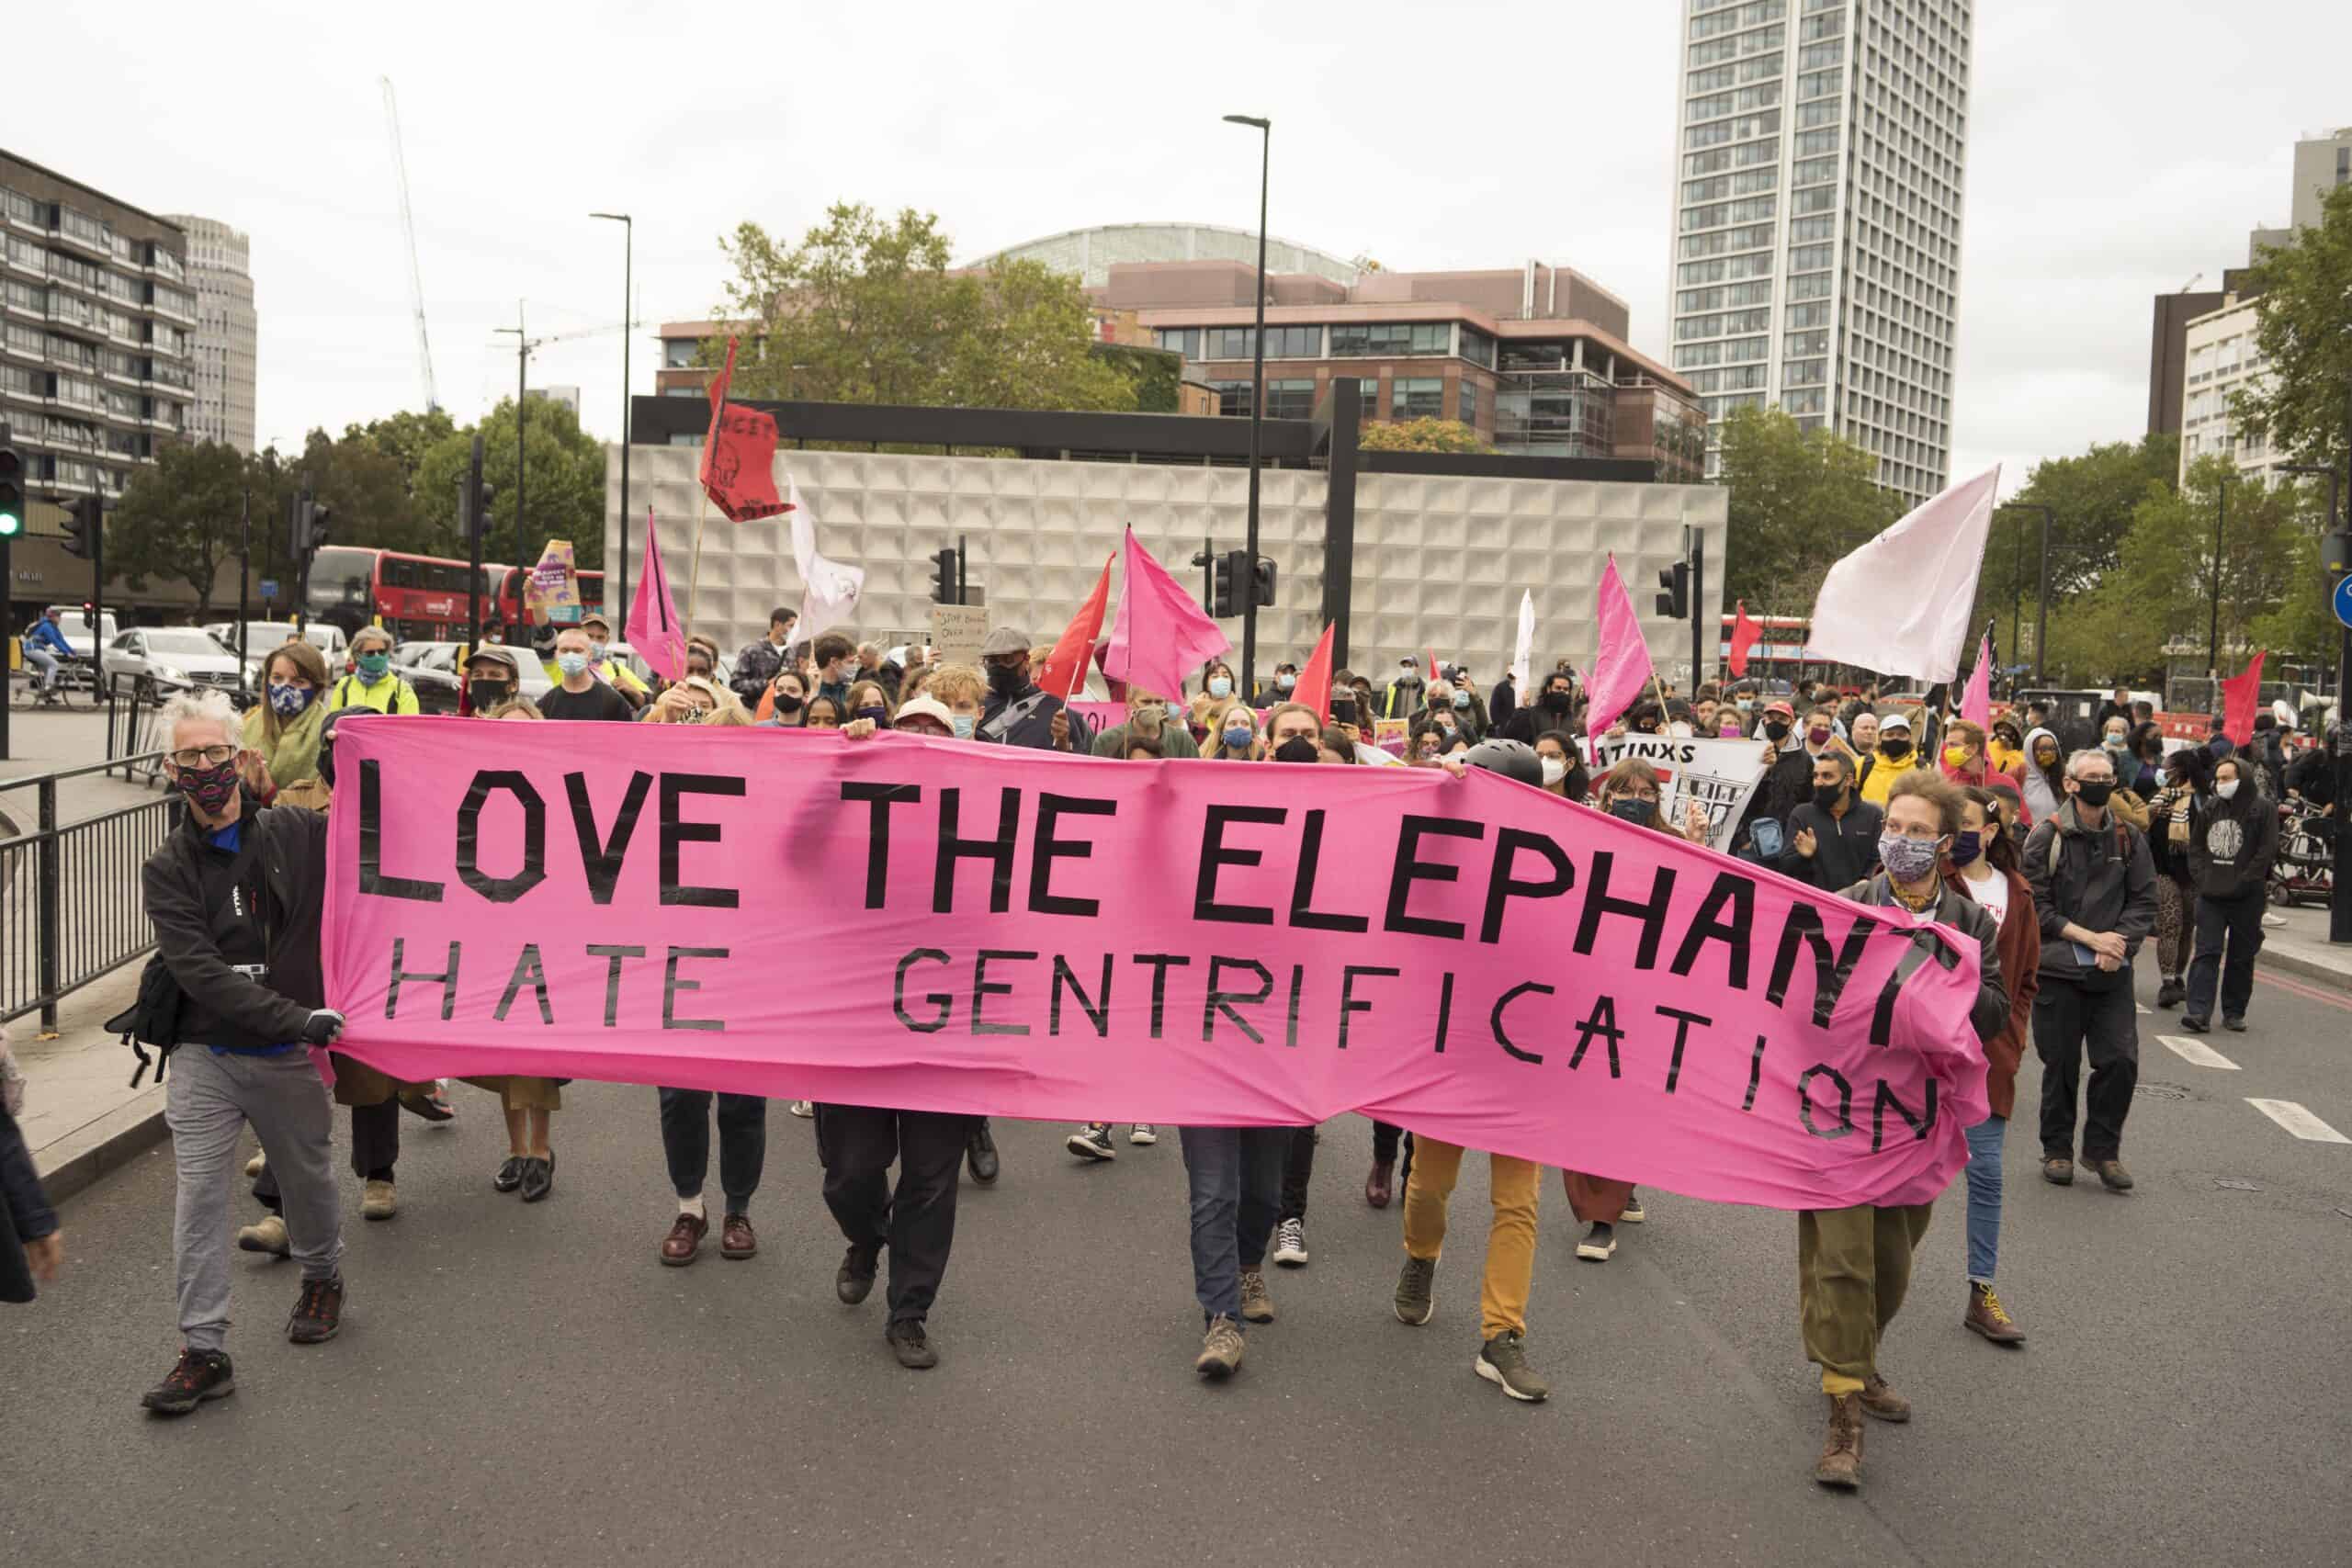 Elephant and Castle shopping centre redevelopment to deliver 979 homes